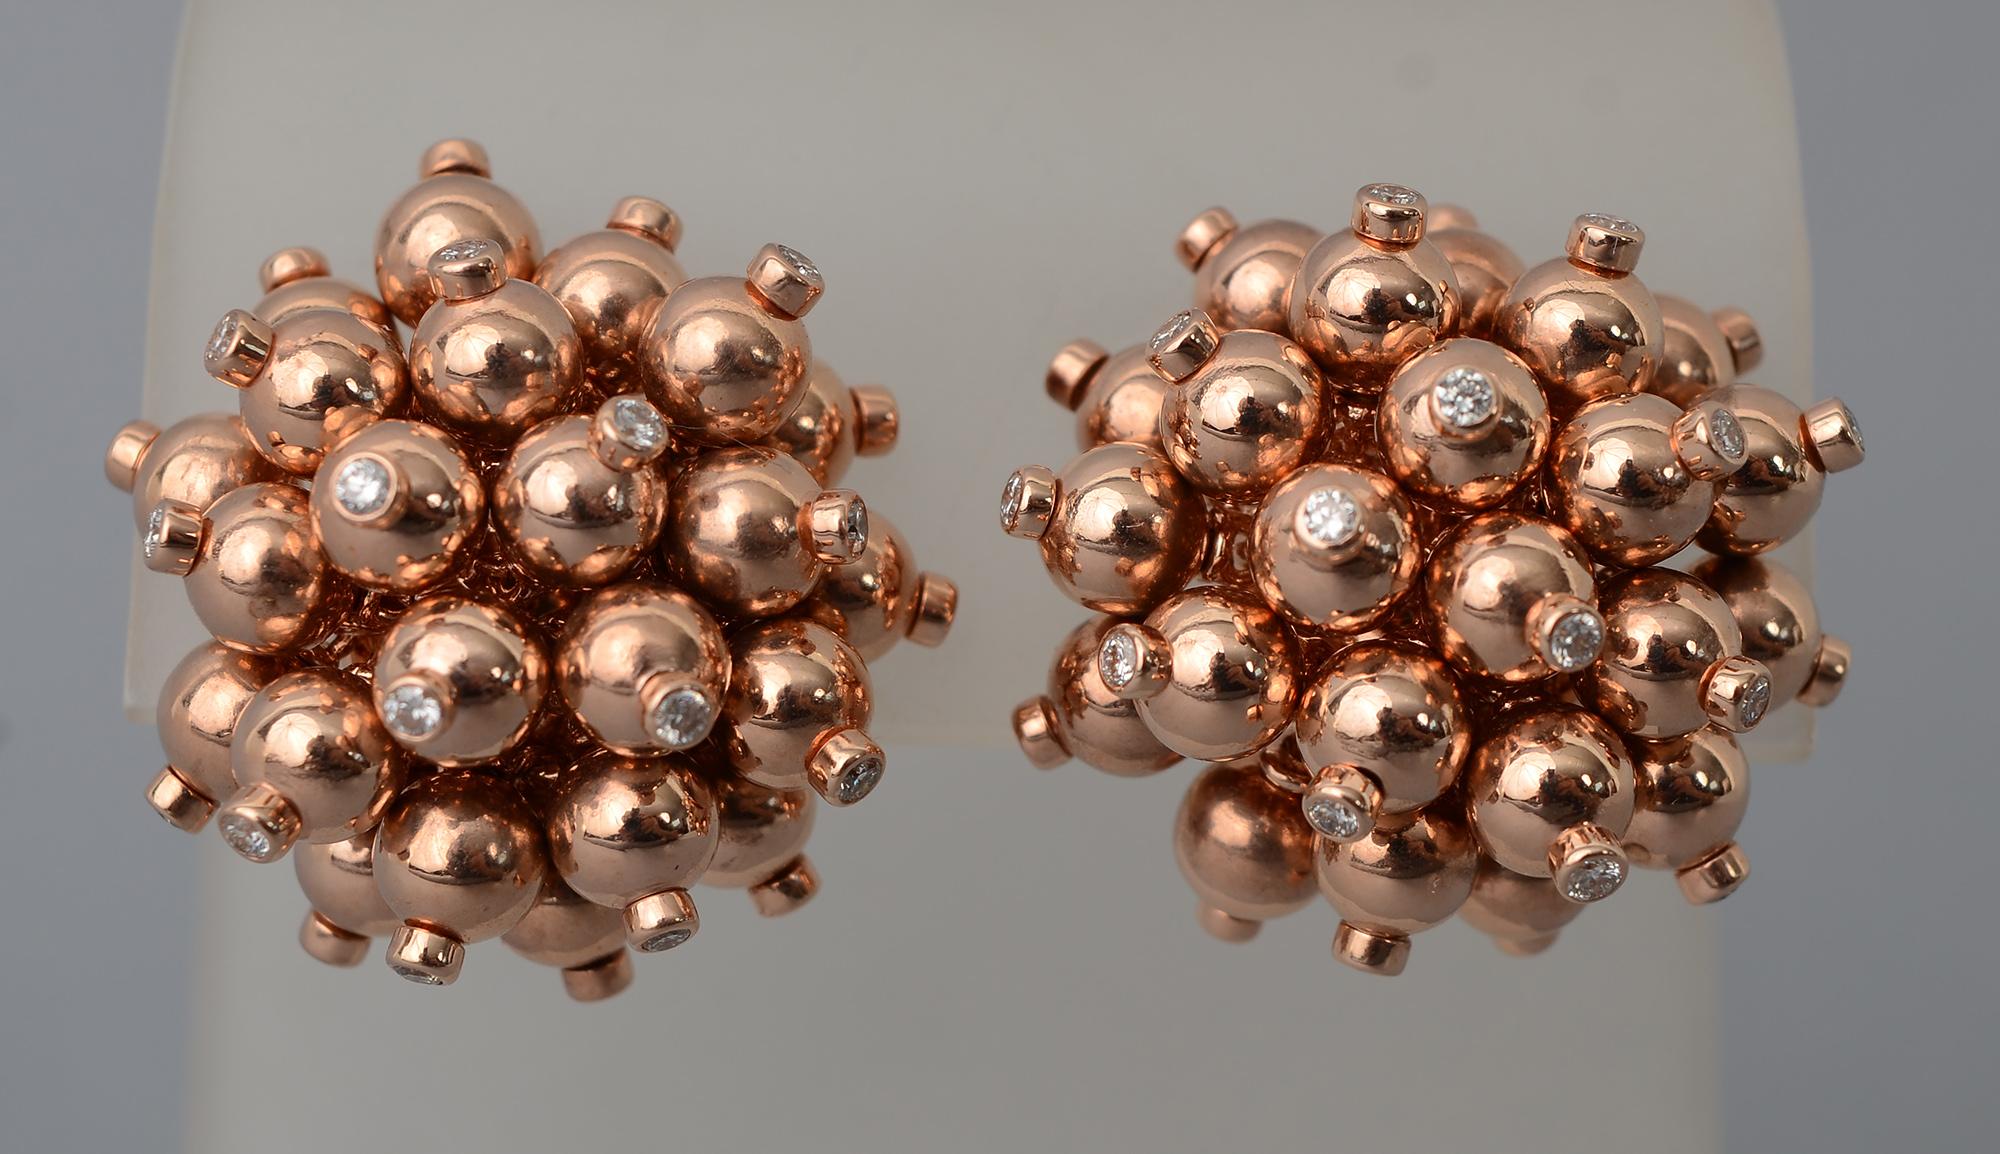 Chic and playful gold ball cluster earrings in 18 karat rose gold. Each ball is tipped with a diamond for a hint of bling.
The earrings have clip backs that can be converted to posts. They are one inch in diameter.